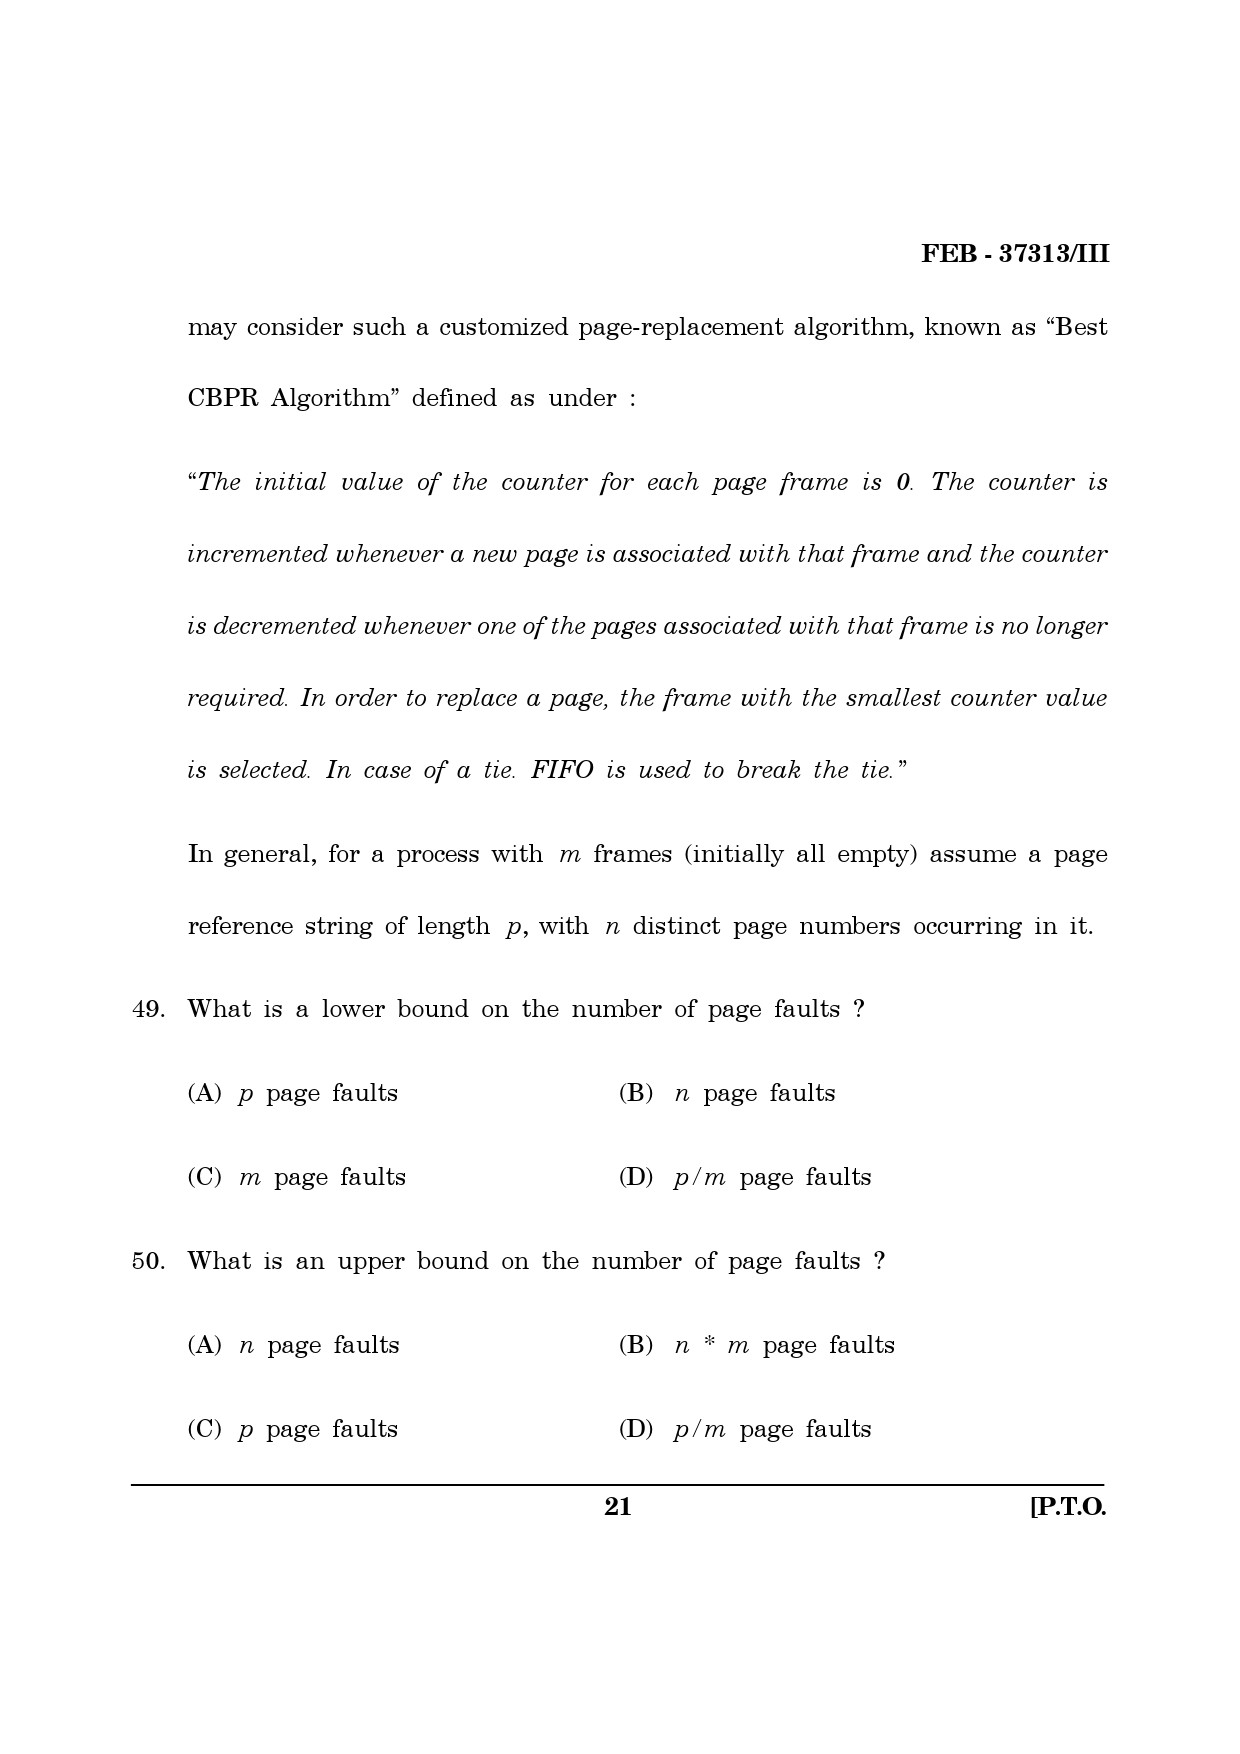 Maharashtra SET Computer Science and Application Question Paper III February 2013 21